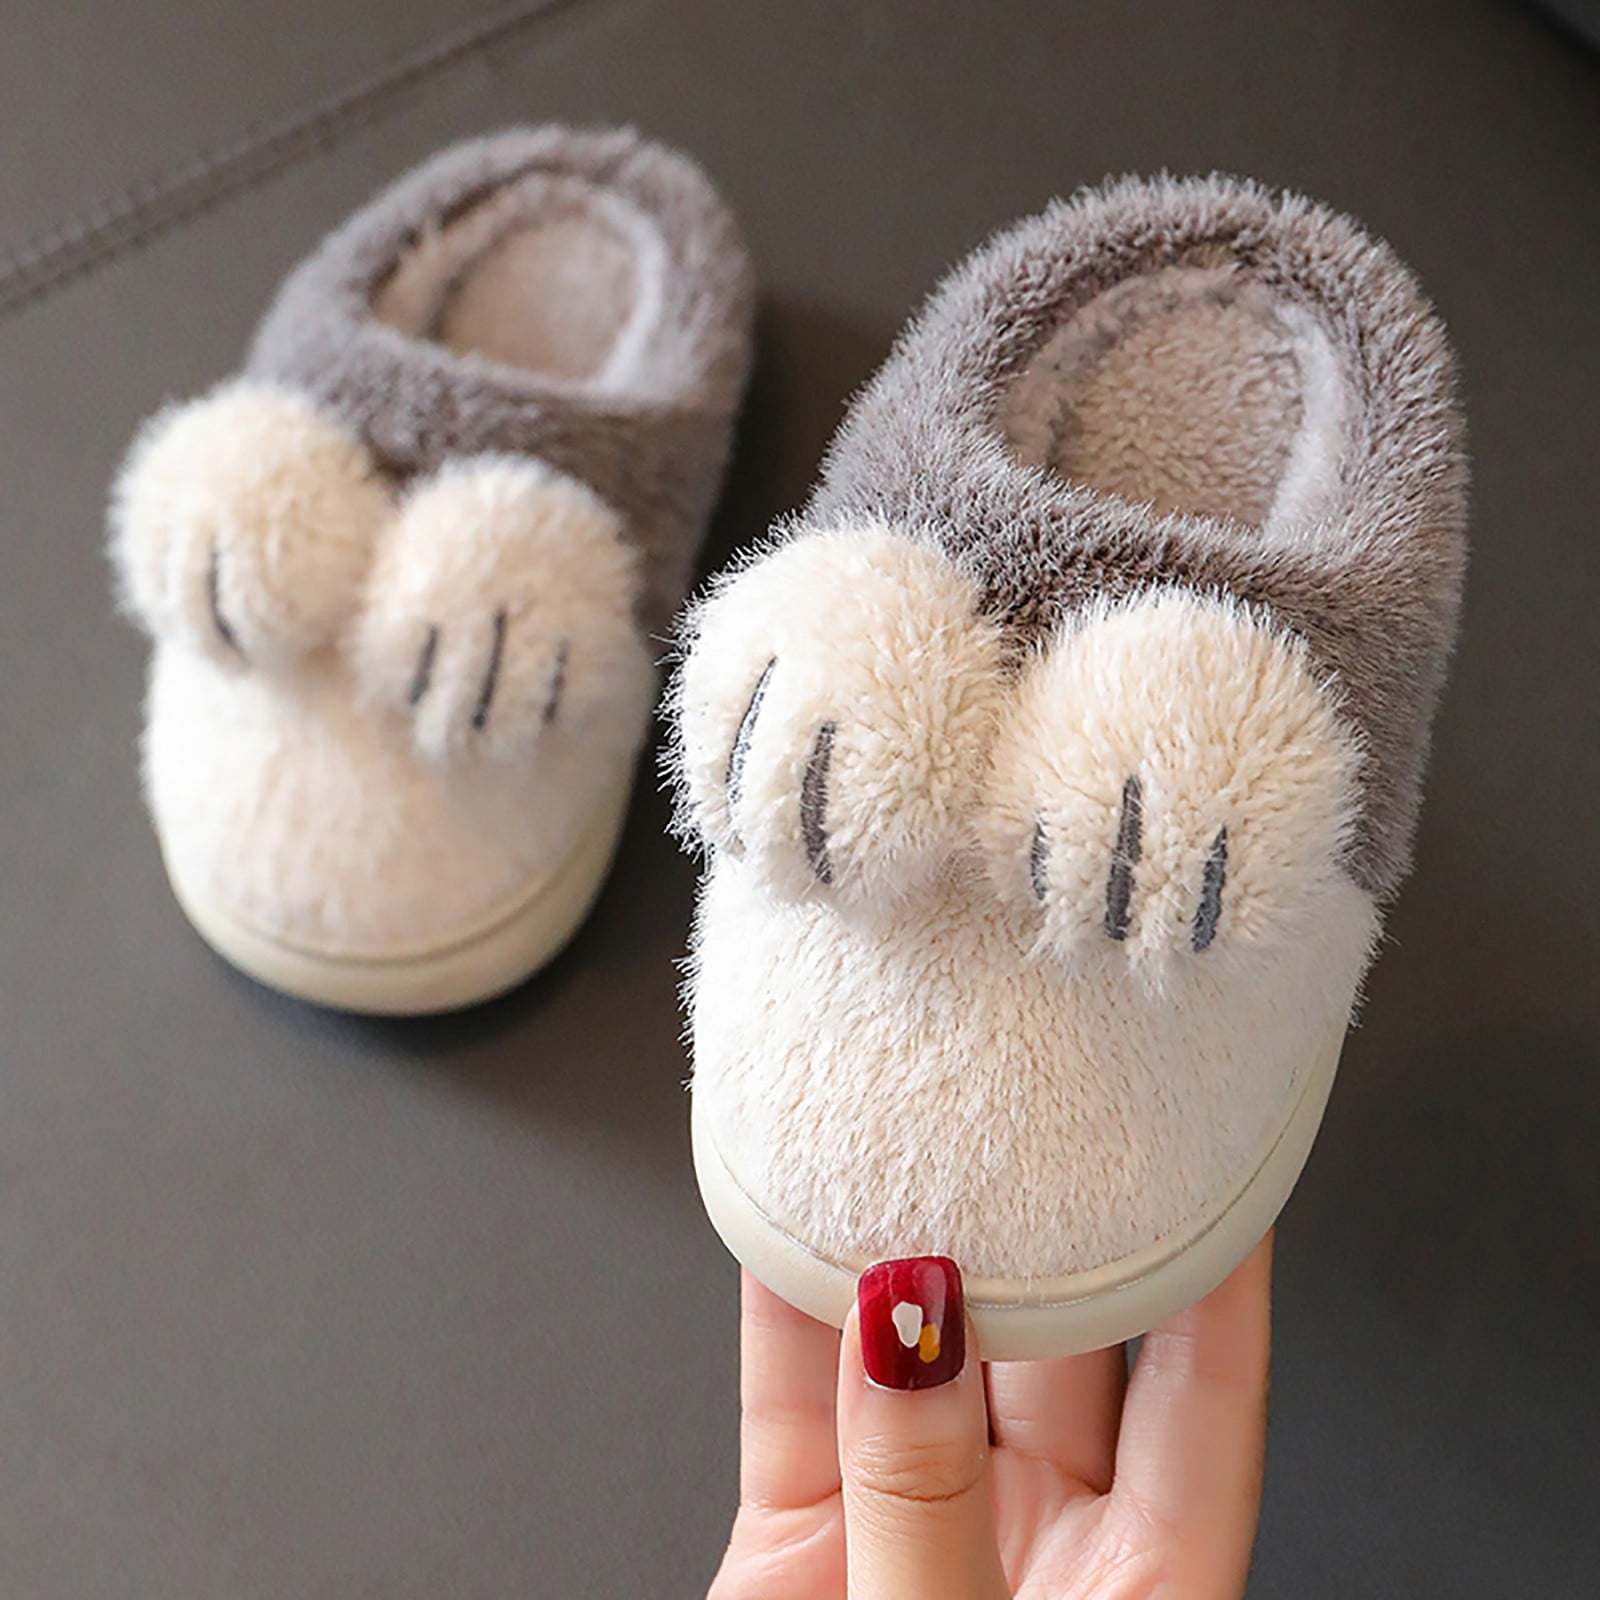 dawn hursey recommends high heeled bedroom slippers pic